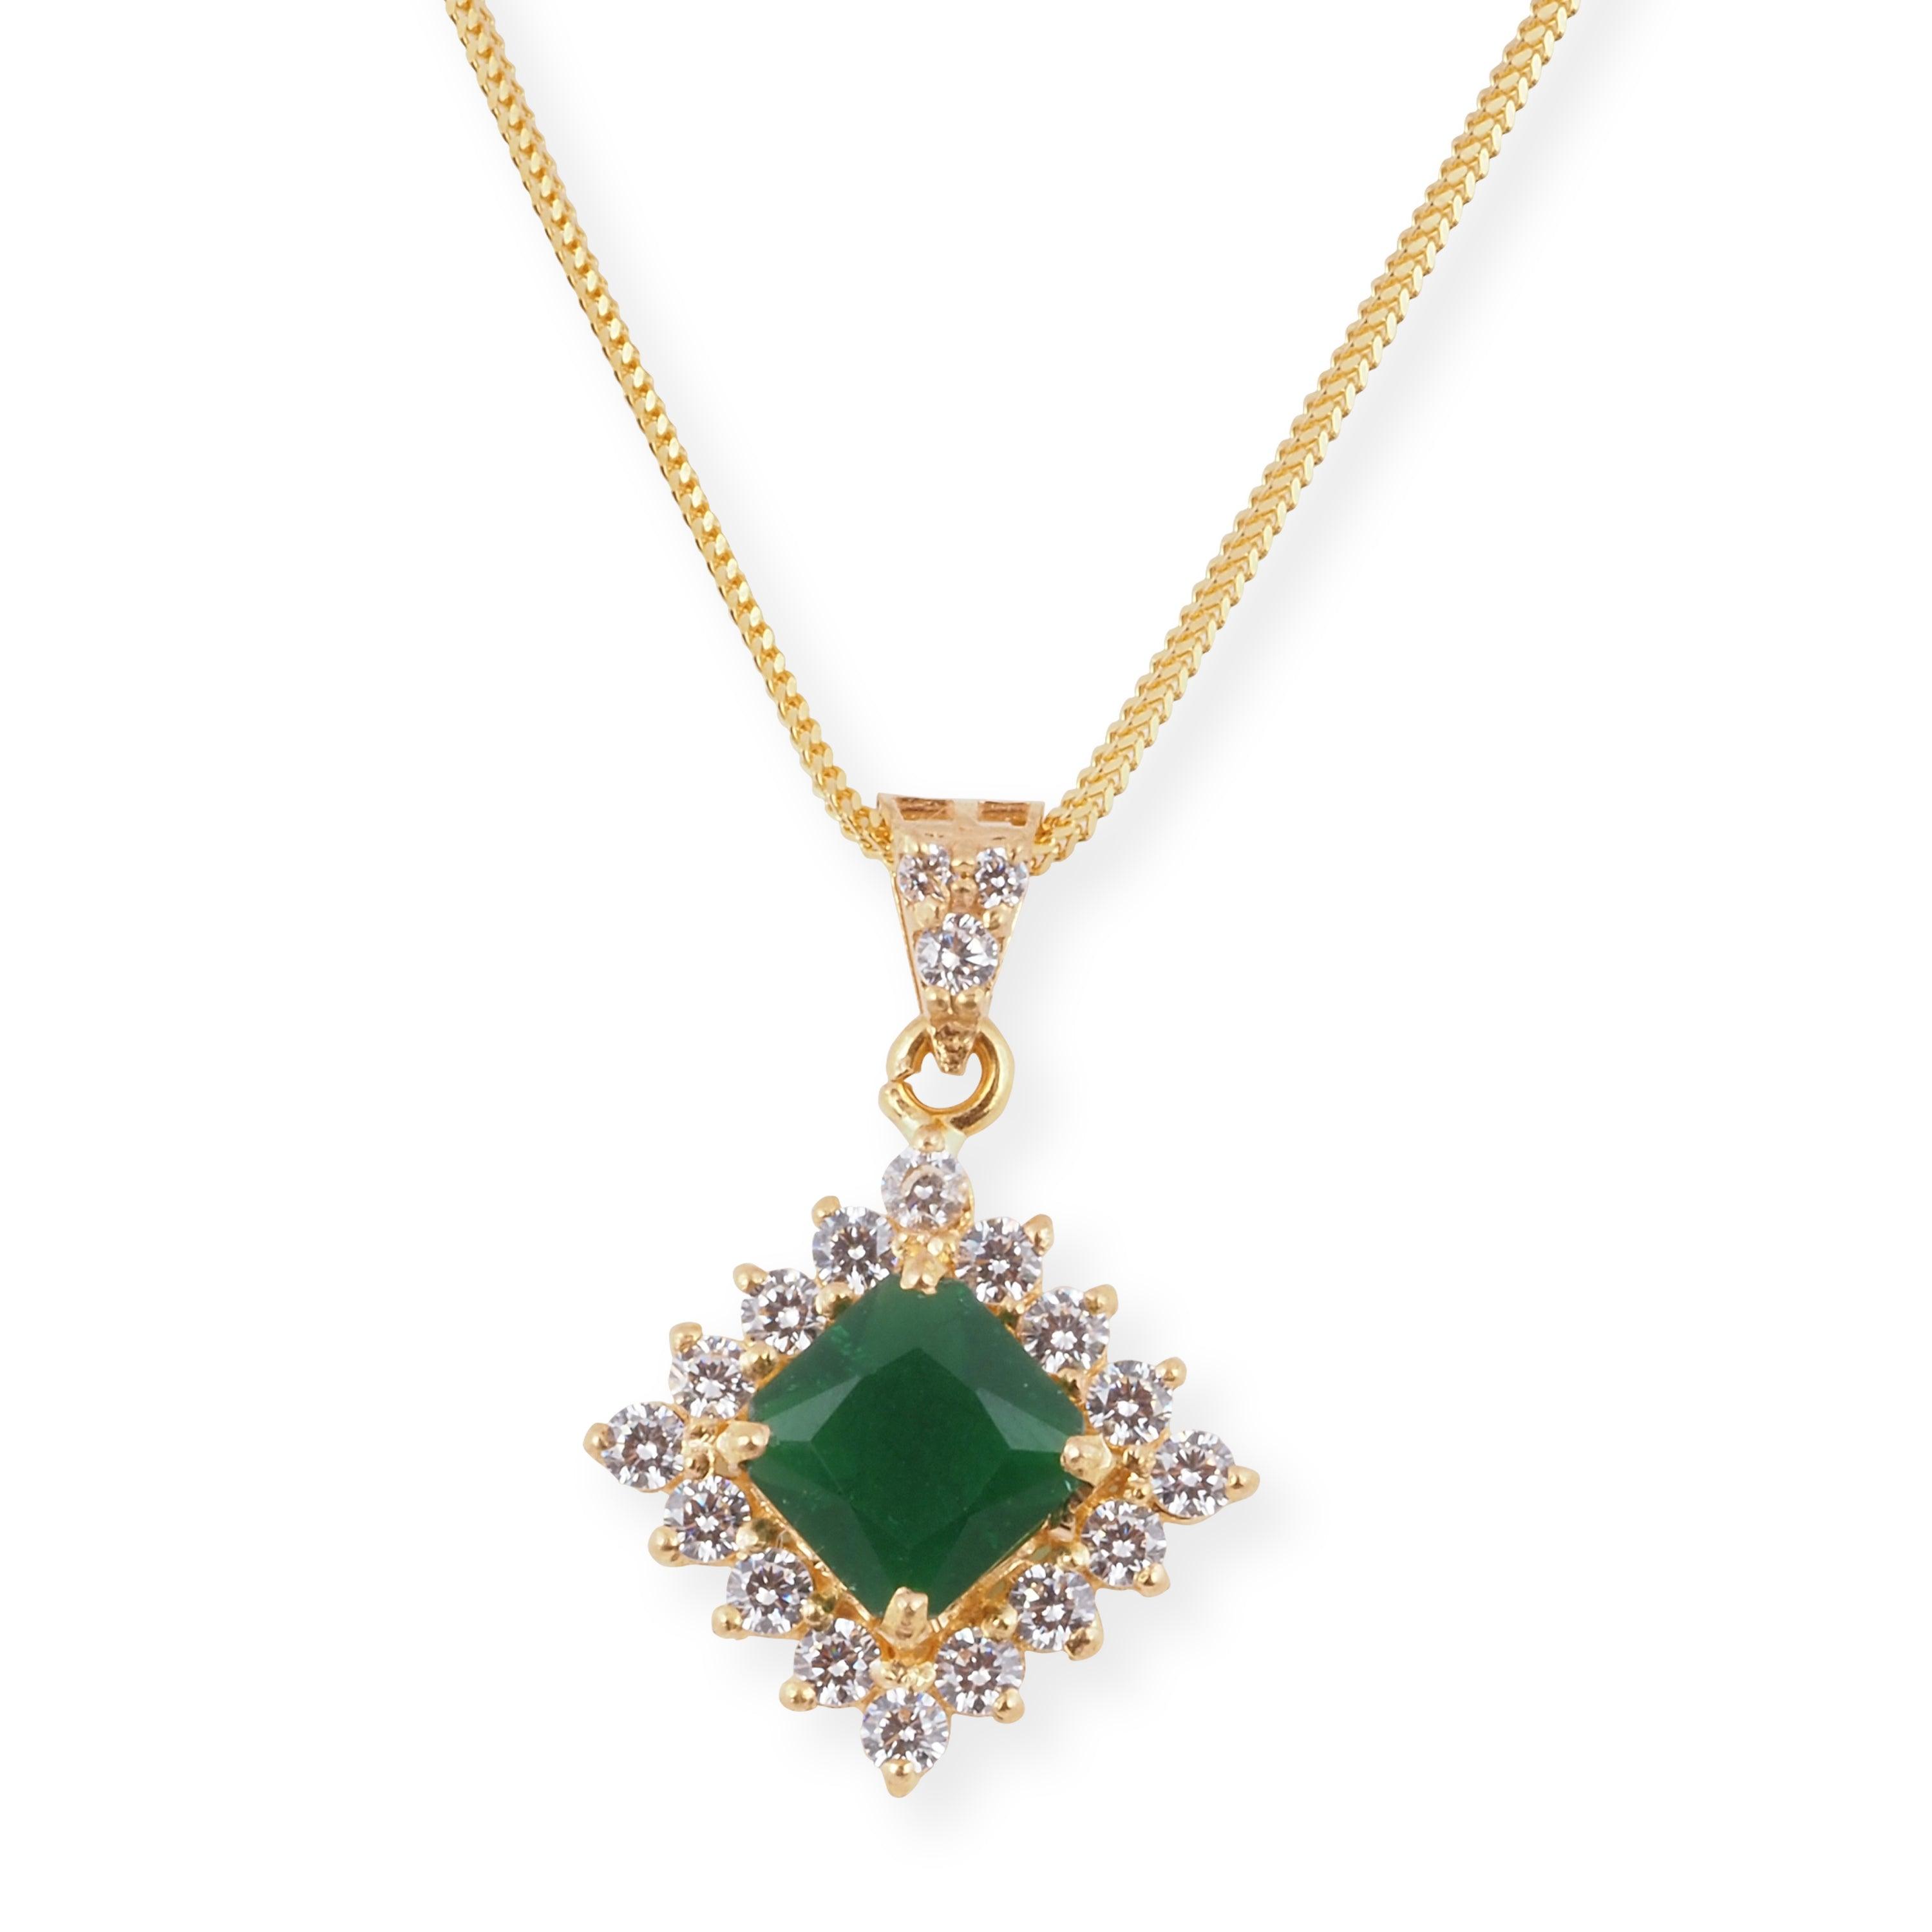 22ct Gold Set with Green and Cubic Zirconia Stones (Pendant + Chain + Earrings) P-8004 E-8004A - Minar Jewellers